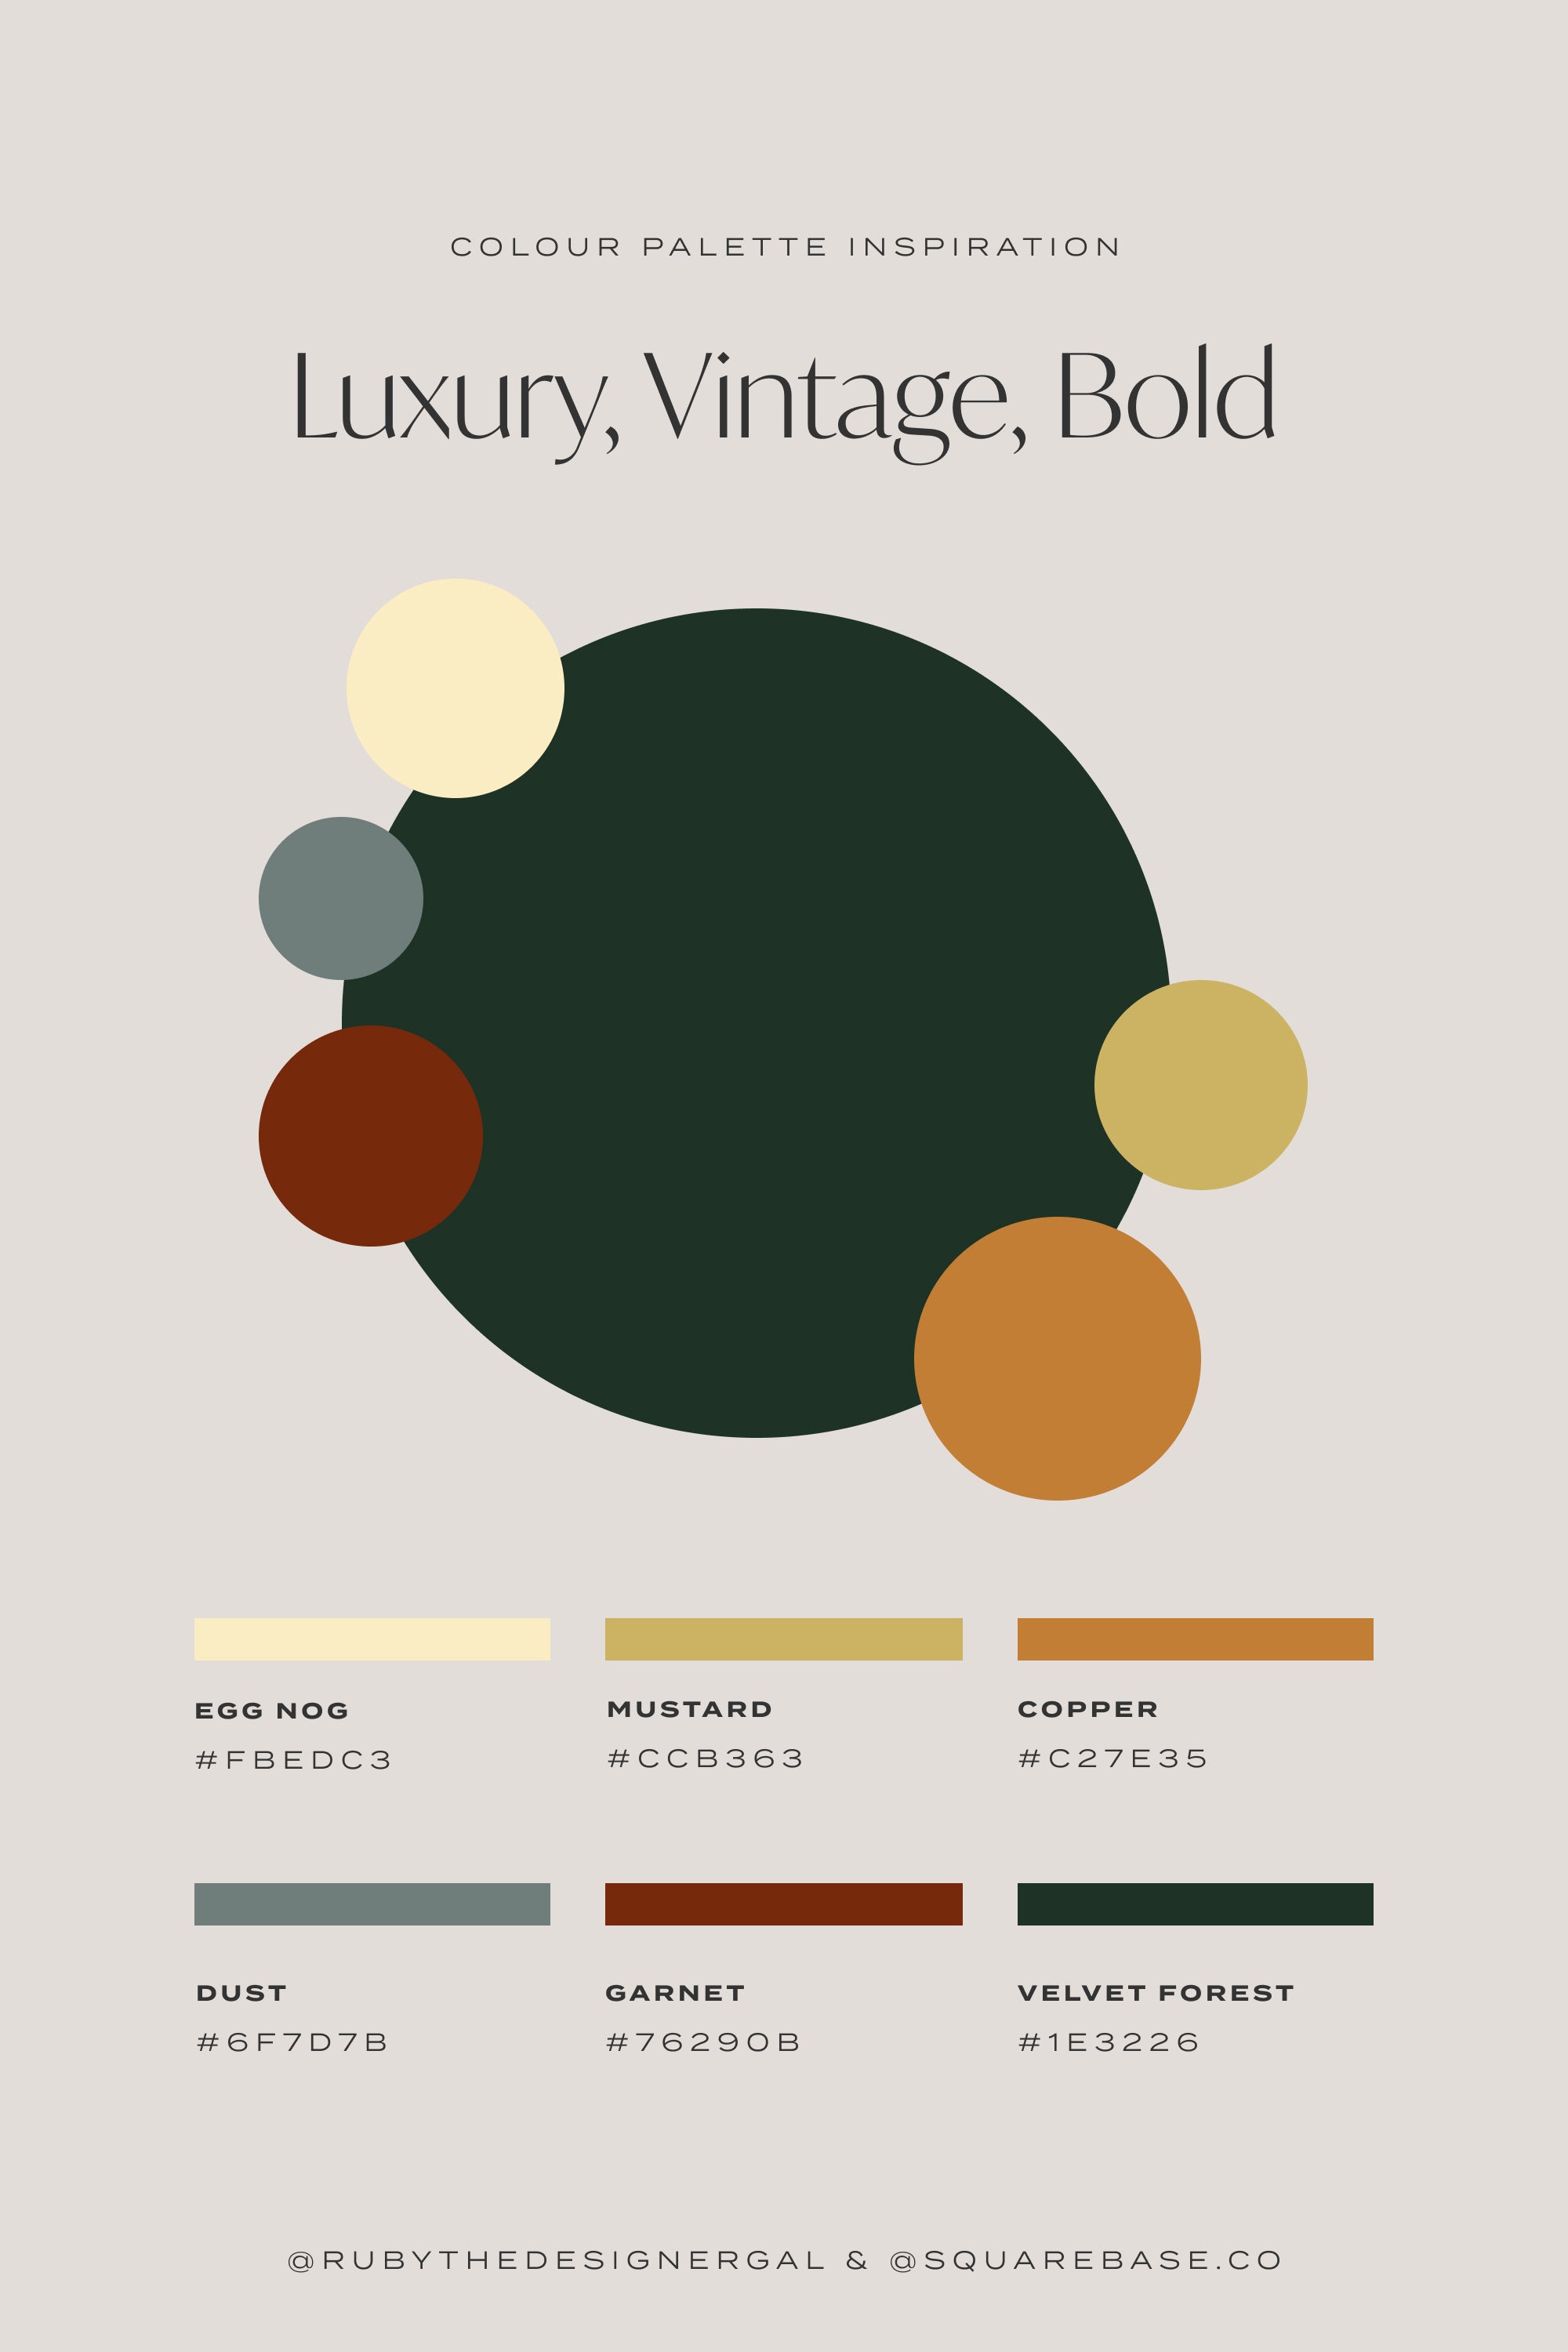 5 Luxury Colour Palettes For Your Brand | Squarespace Design Inspiration